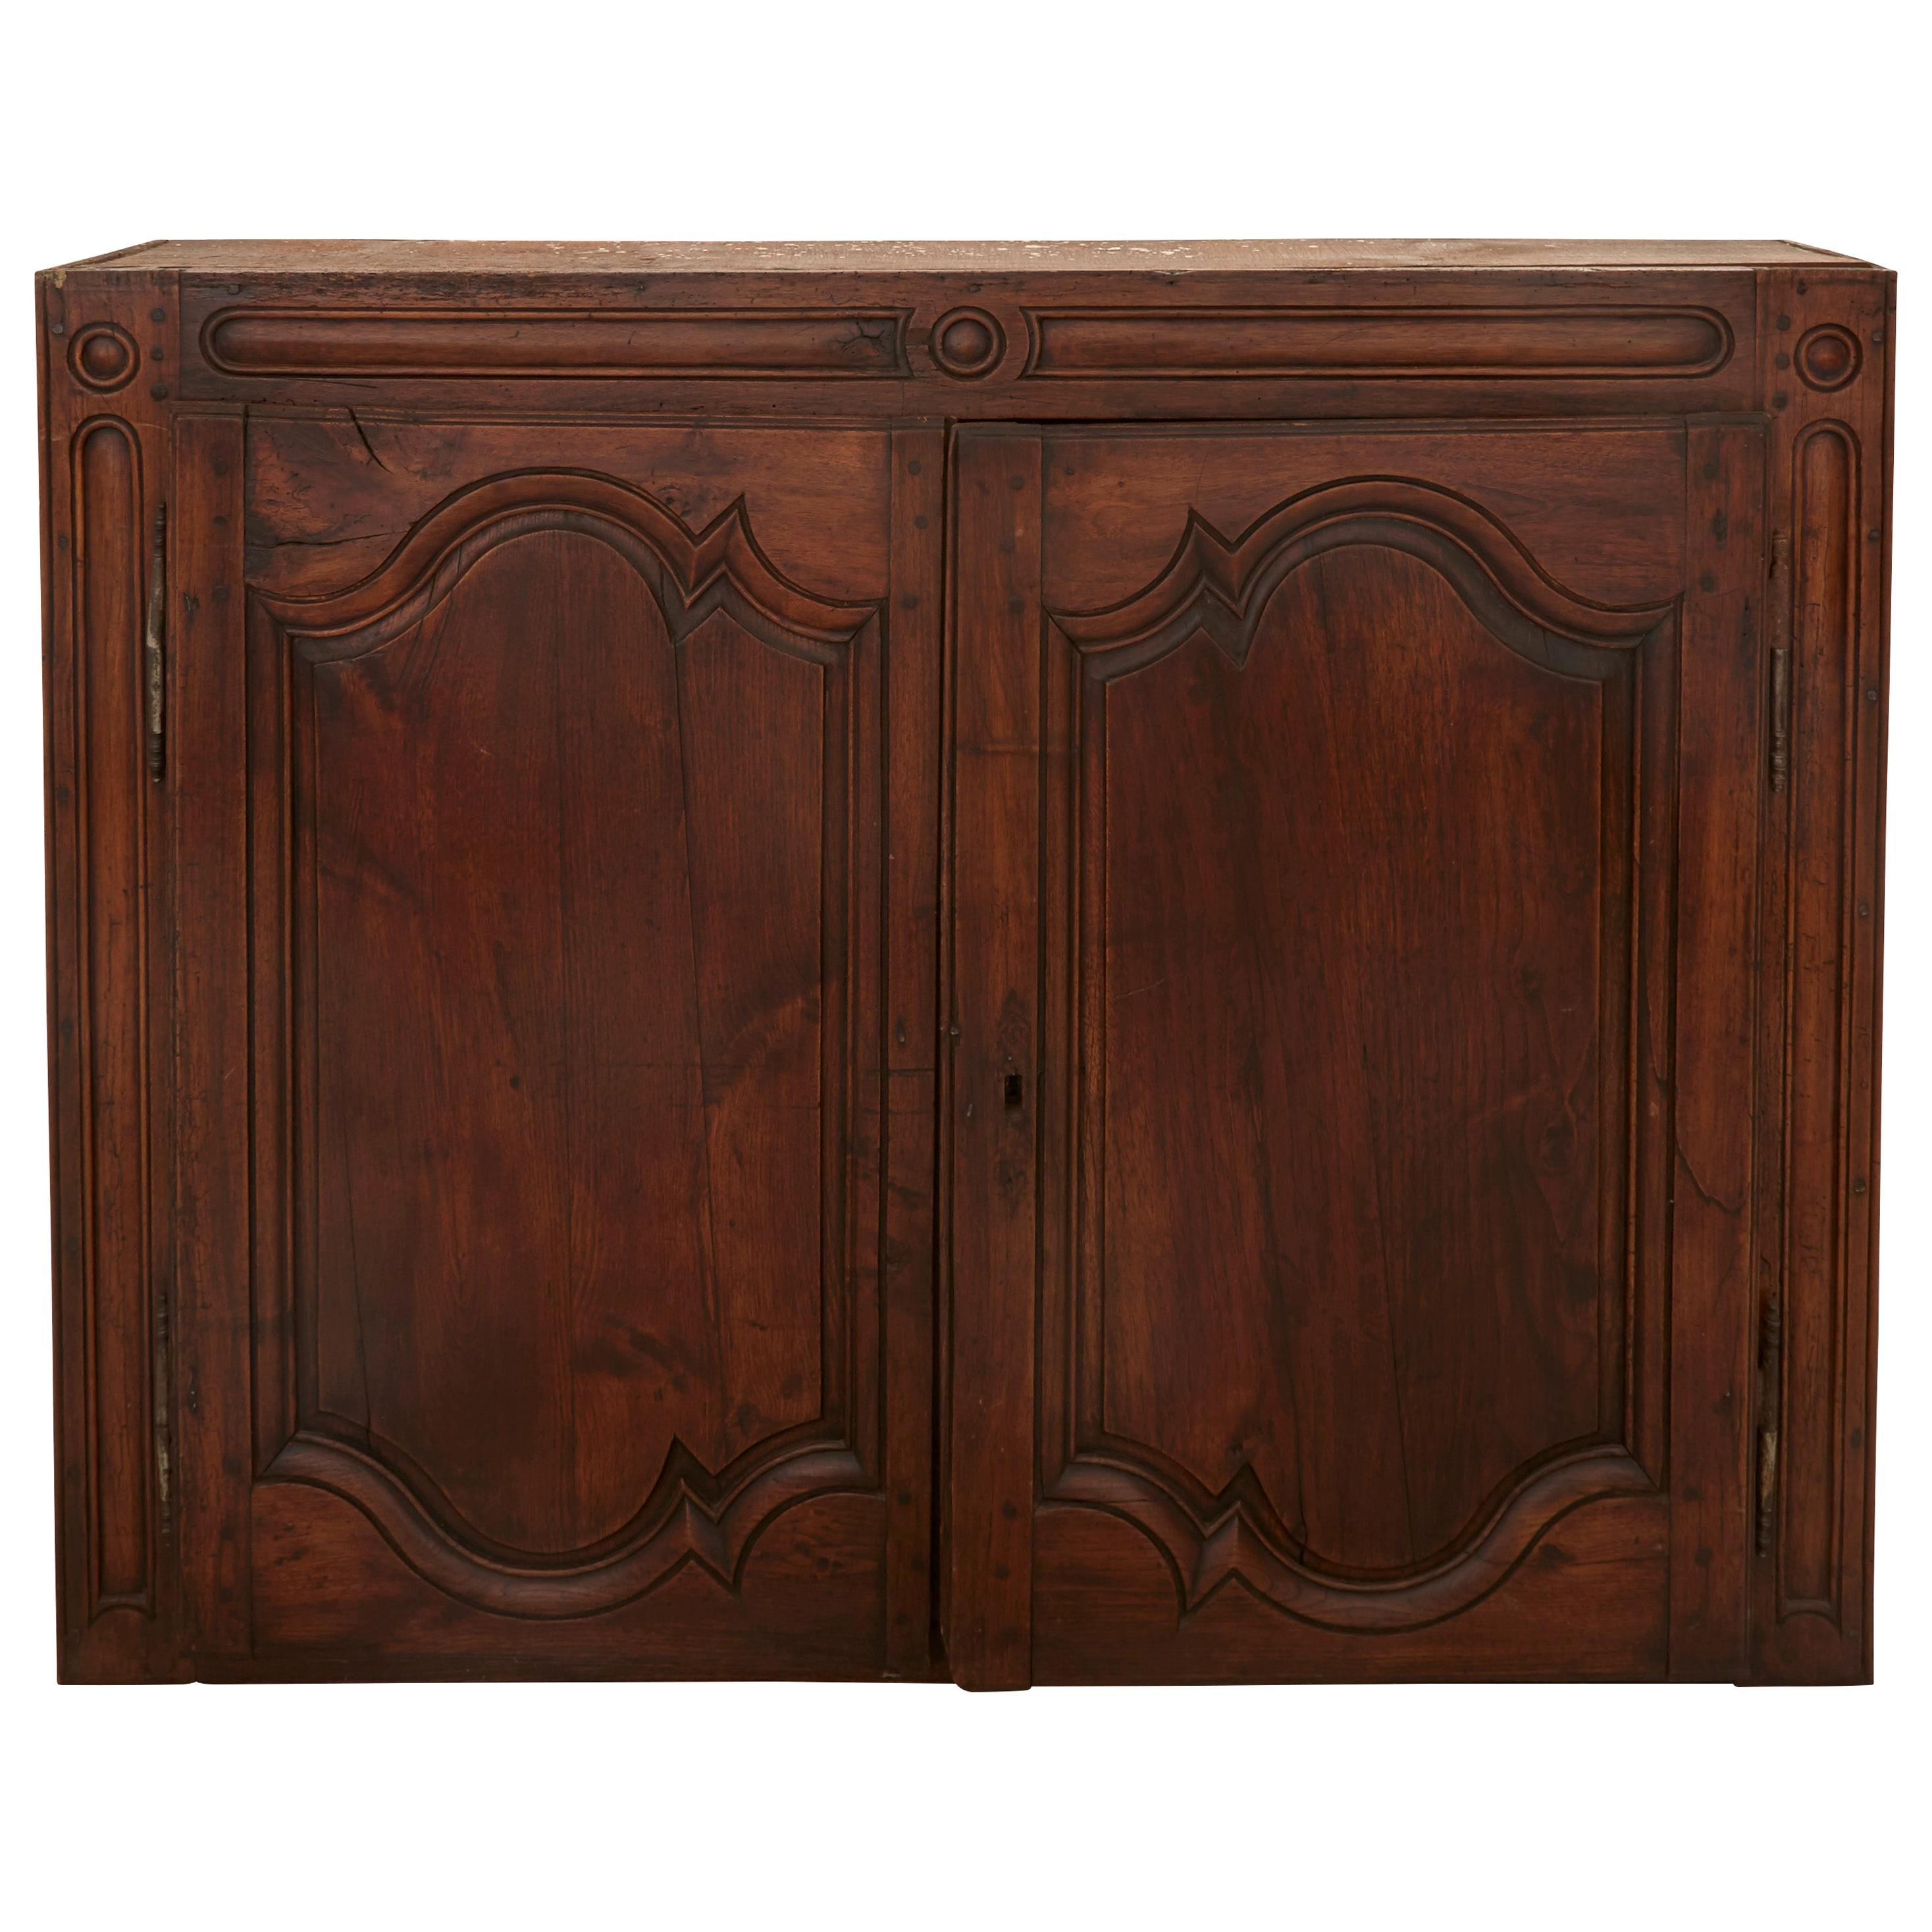 Antique French Provincial Style Cabinet For Sale